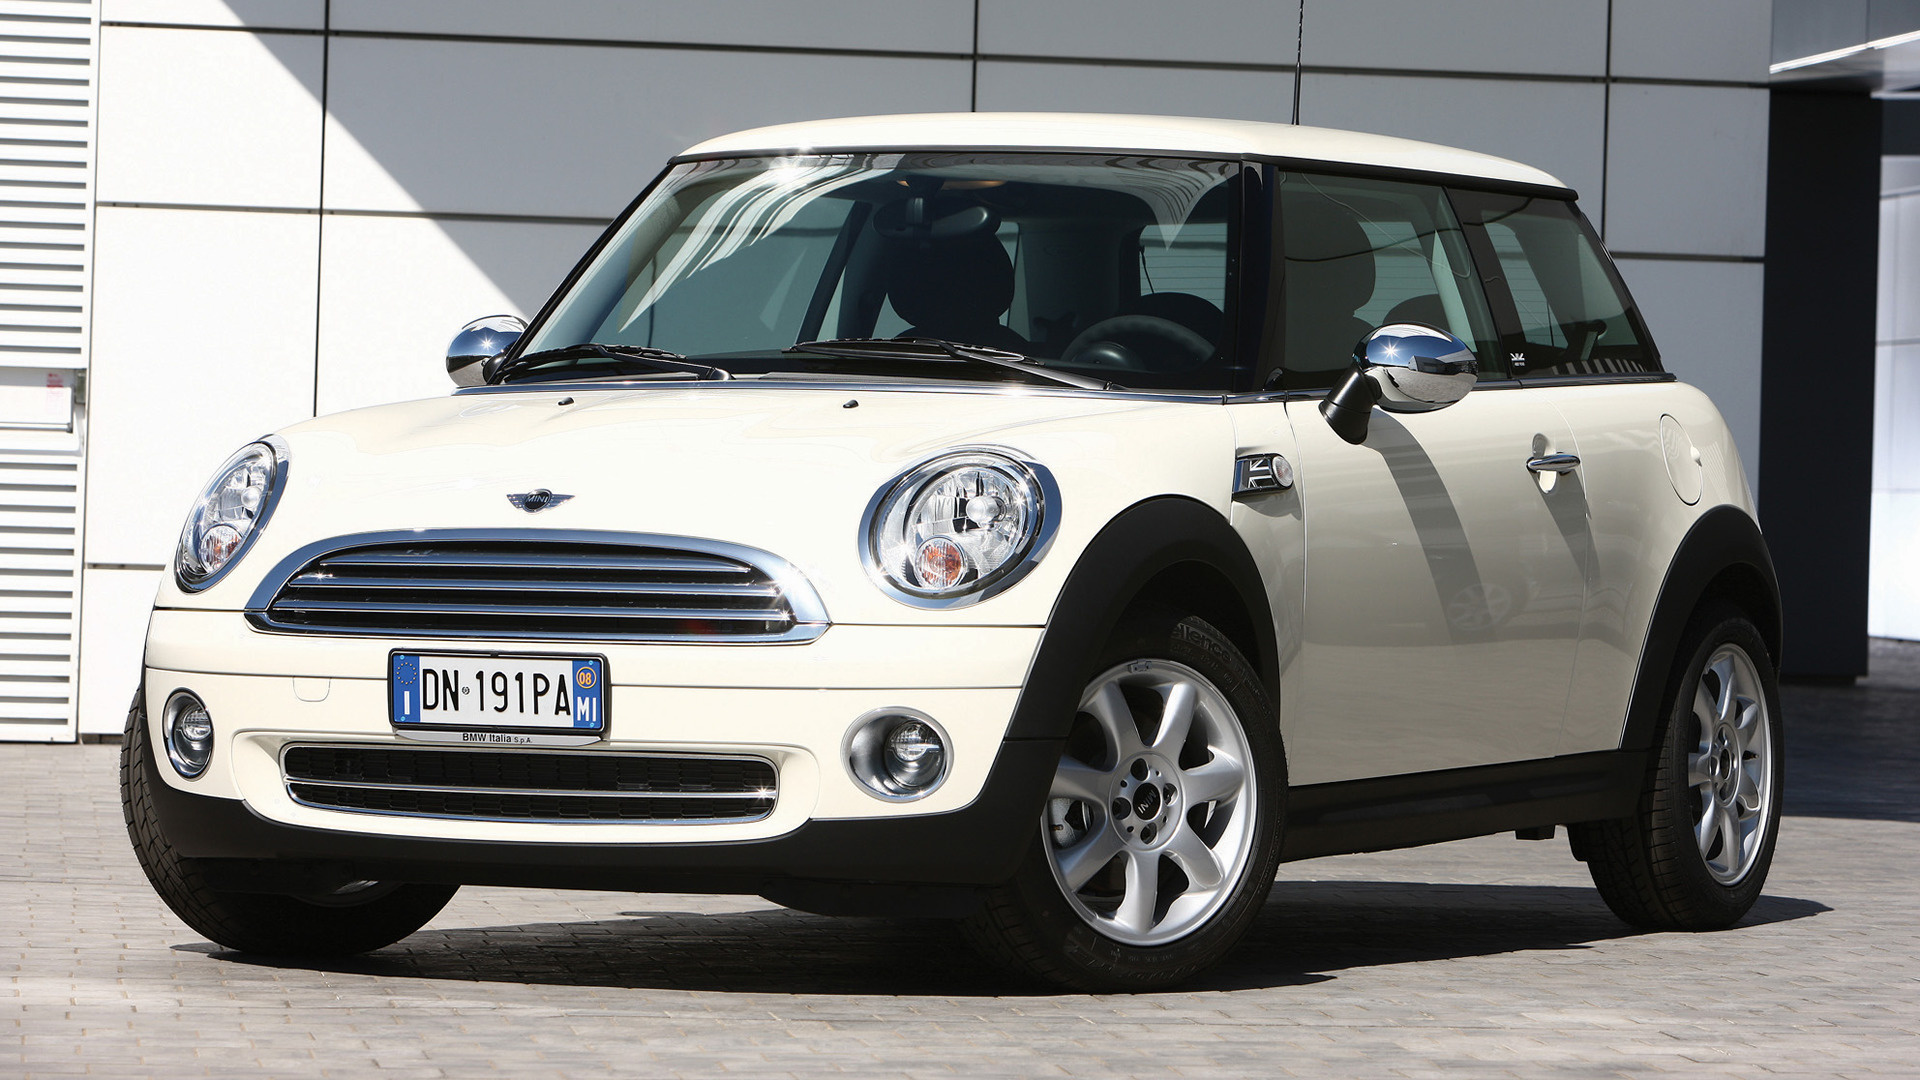 Mini Cooper Abbey Road Wallpapers